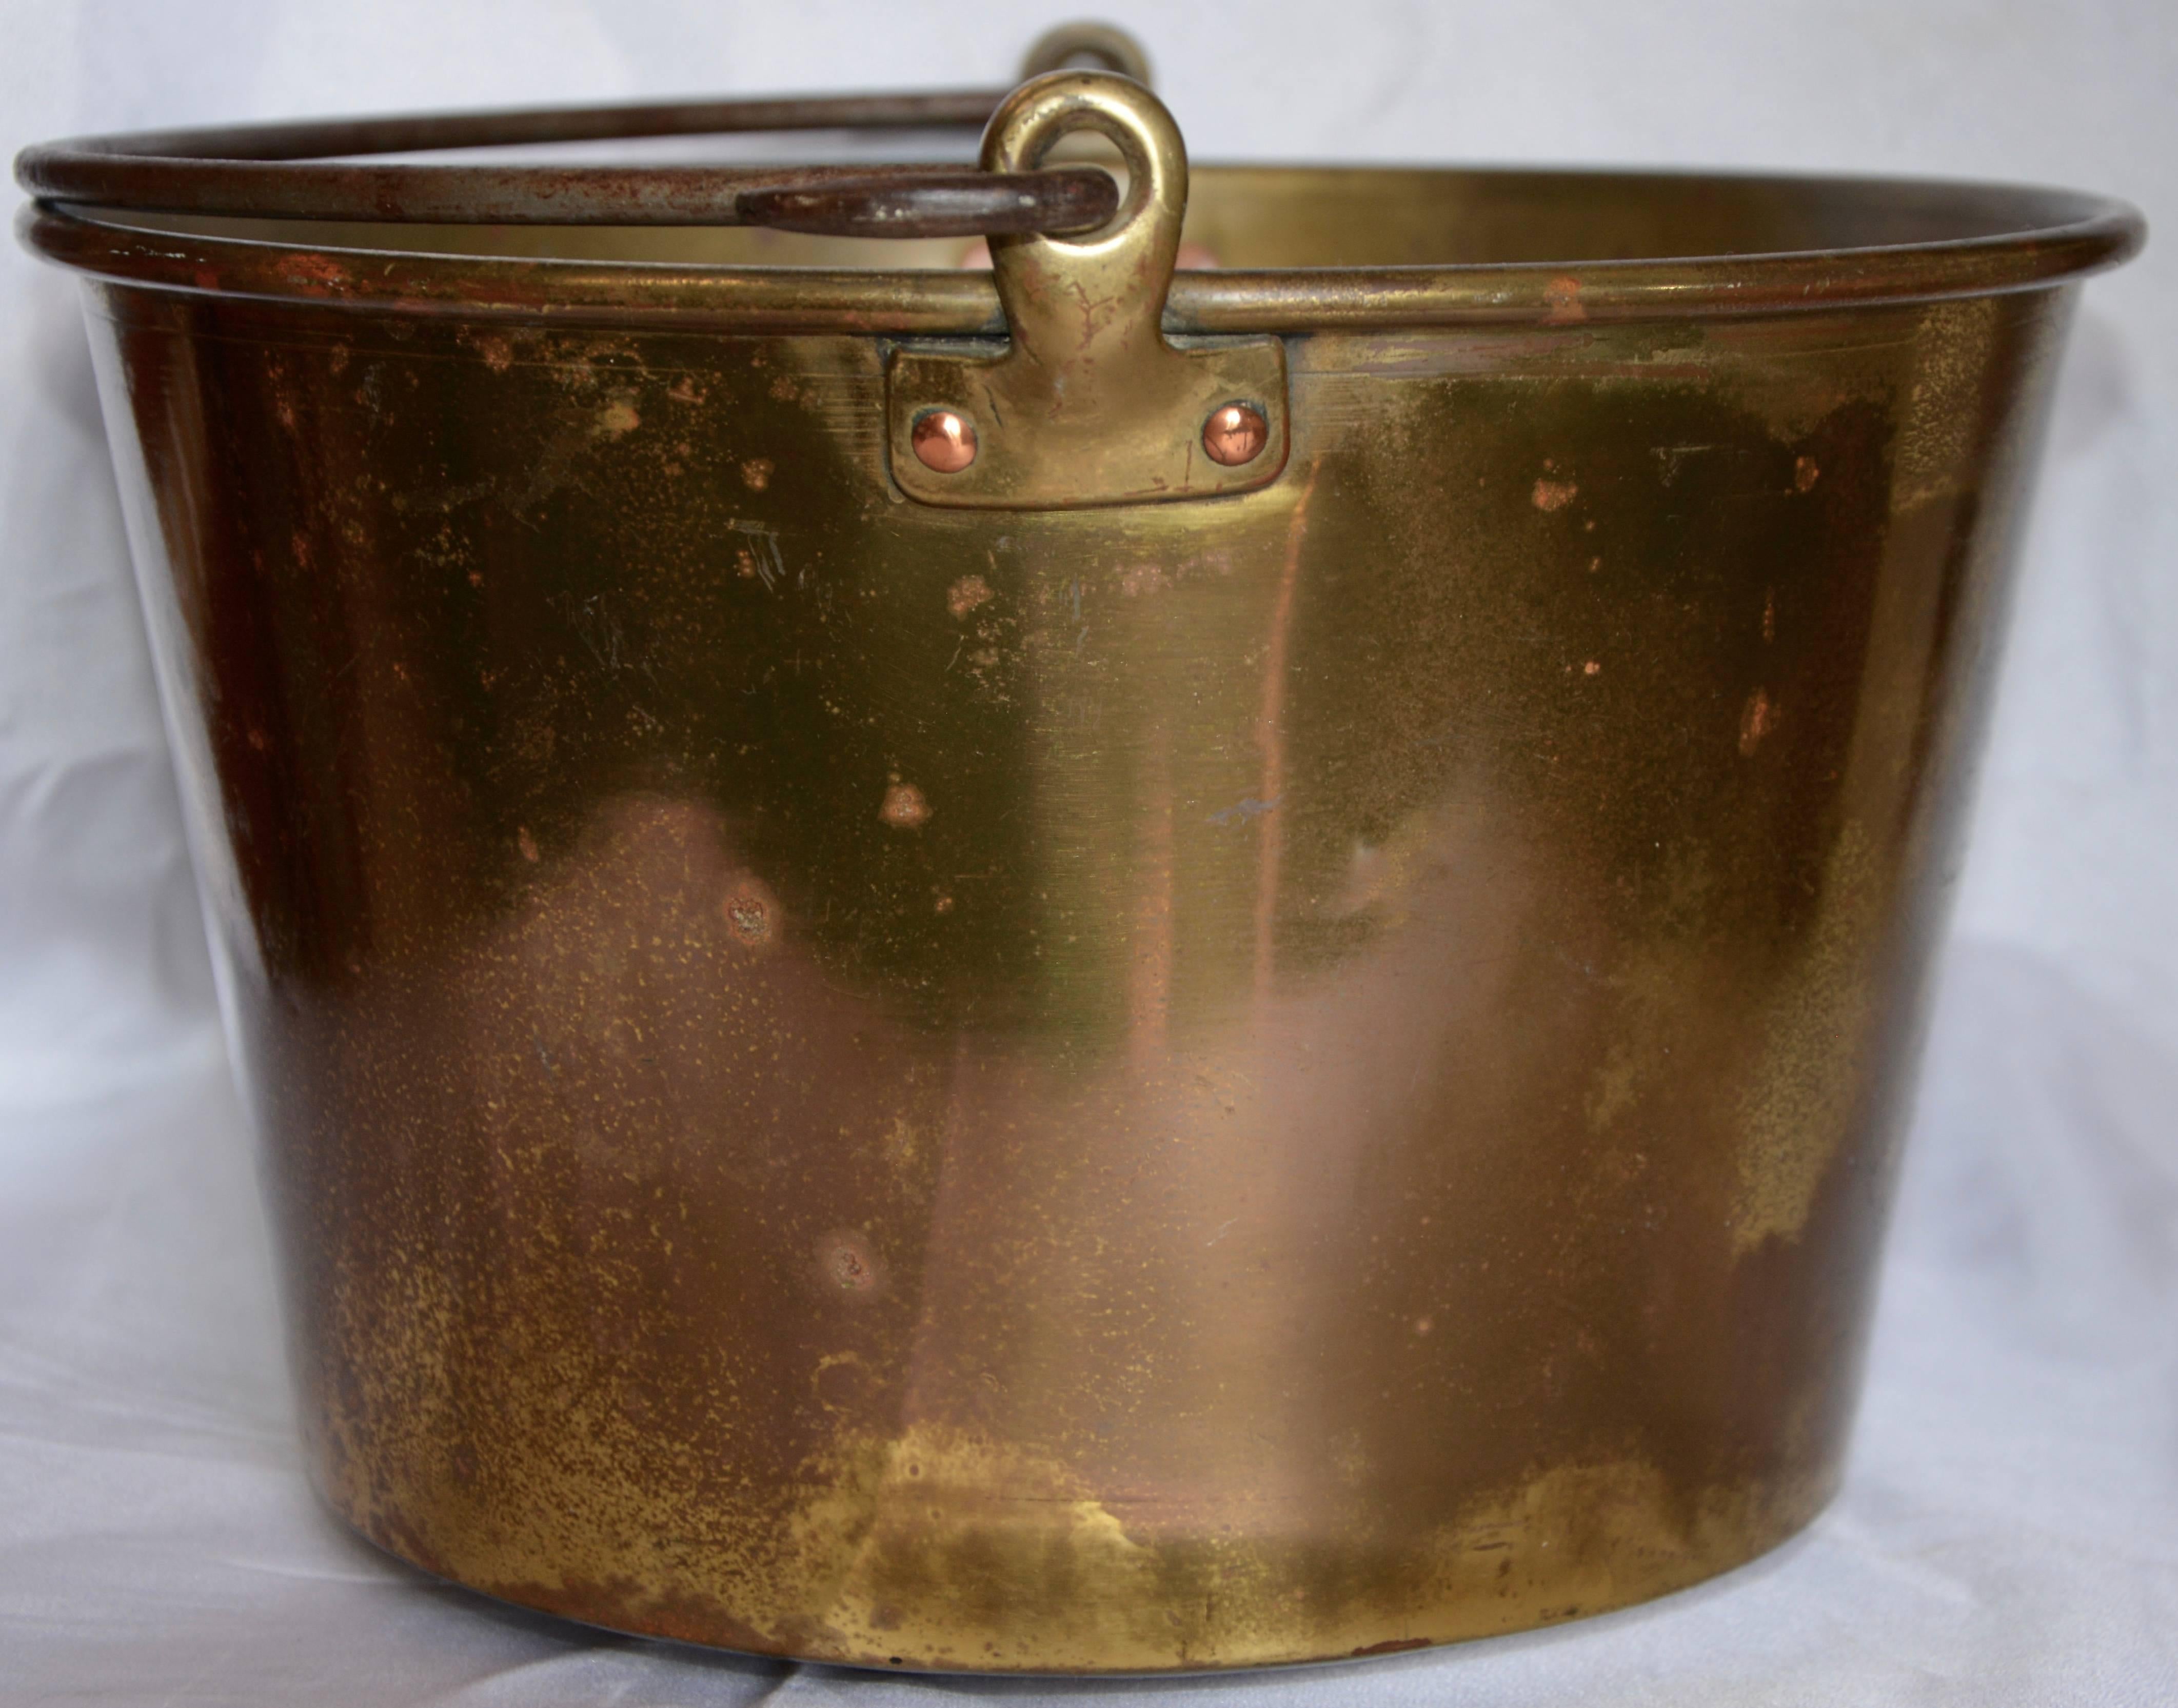 You can tell this brass bucket was used at some time for a special purpose. The dents on the bottom are attempting to tell a story. The cast iron handle is held in place with brass loops that are attached to the bucket with copper brads. This would